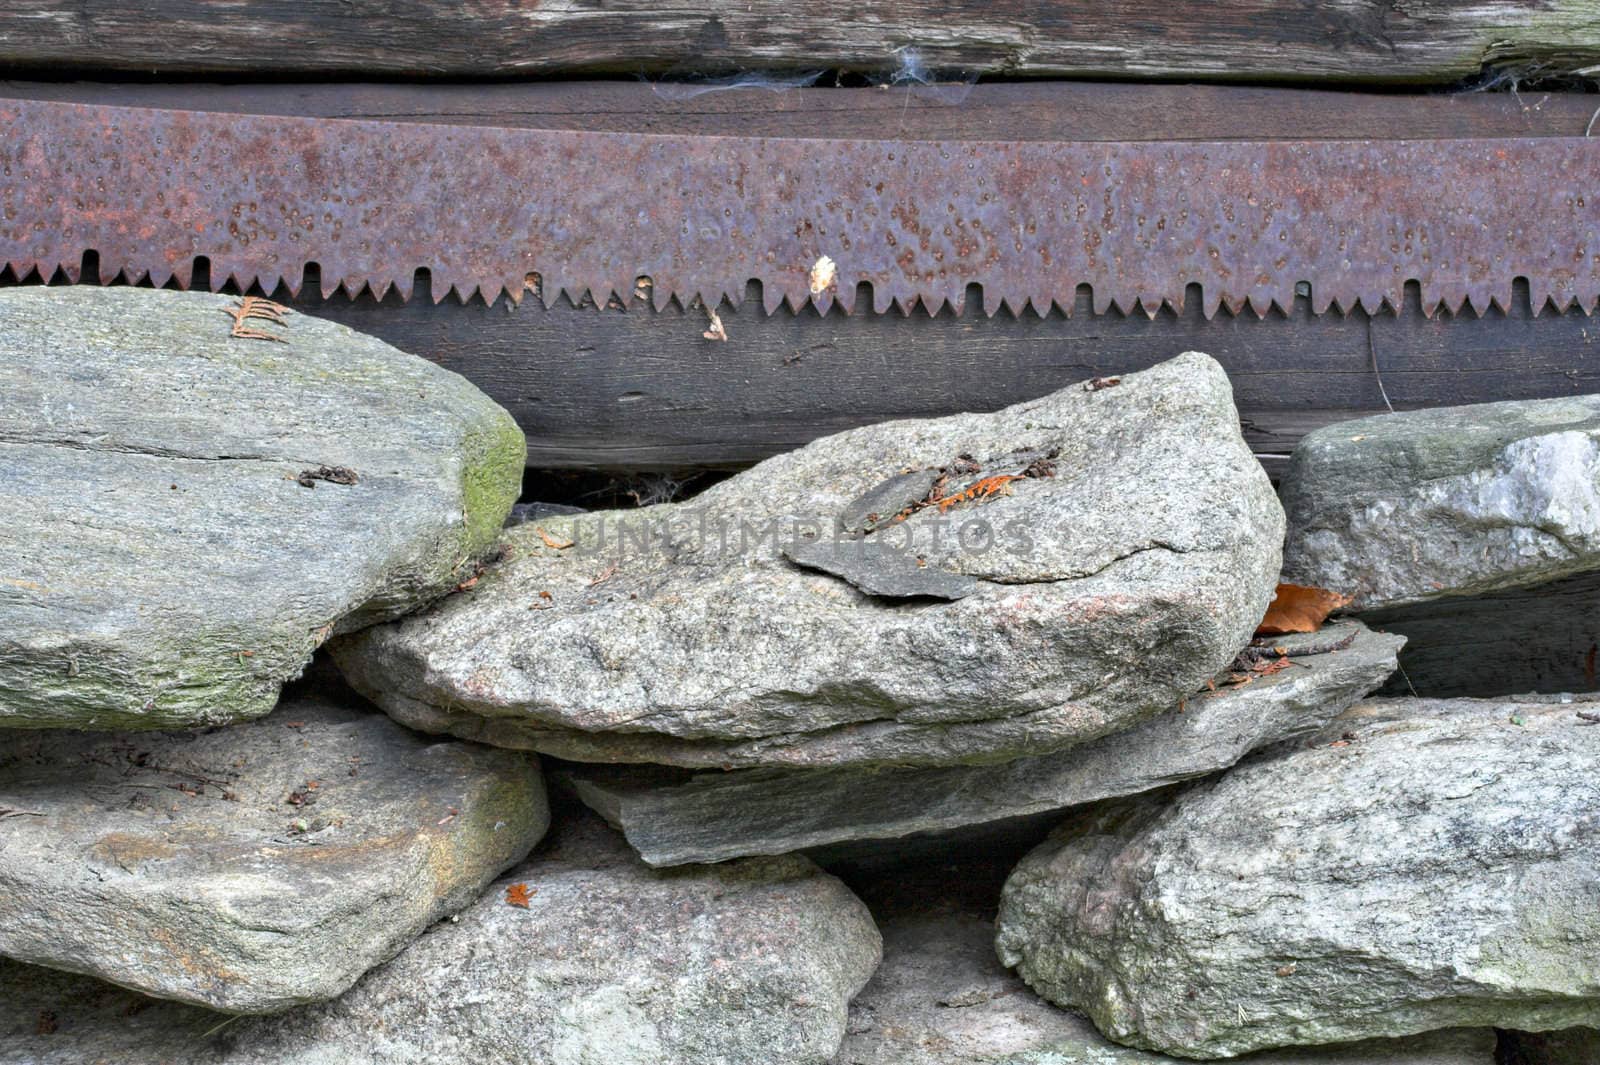 A rusty old saw blade hanging above a pile of stacked rocks.